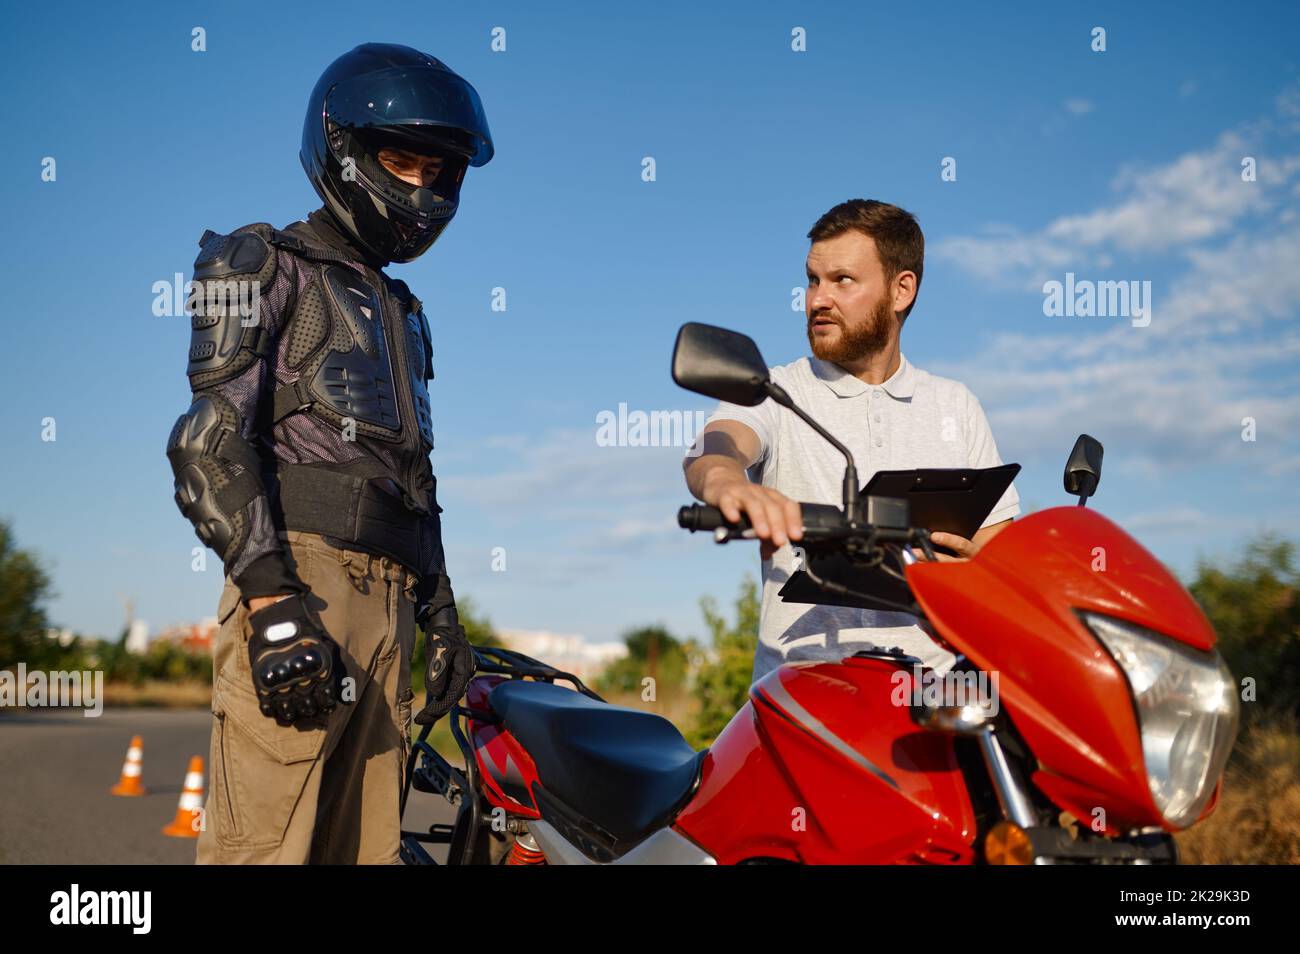 Driving lesson on motordrome, motorcycle school Stock Photo